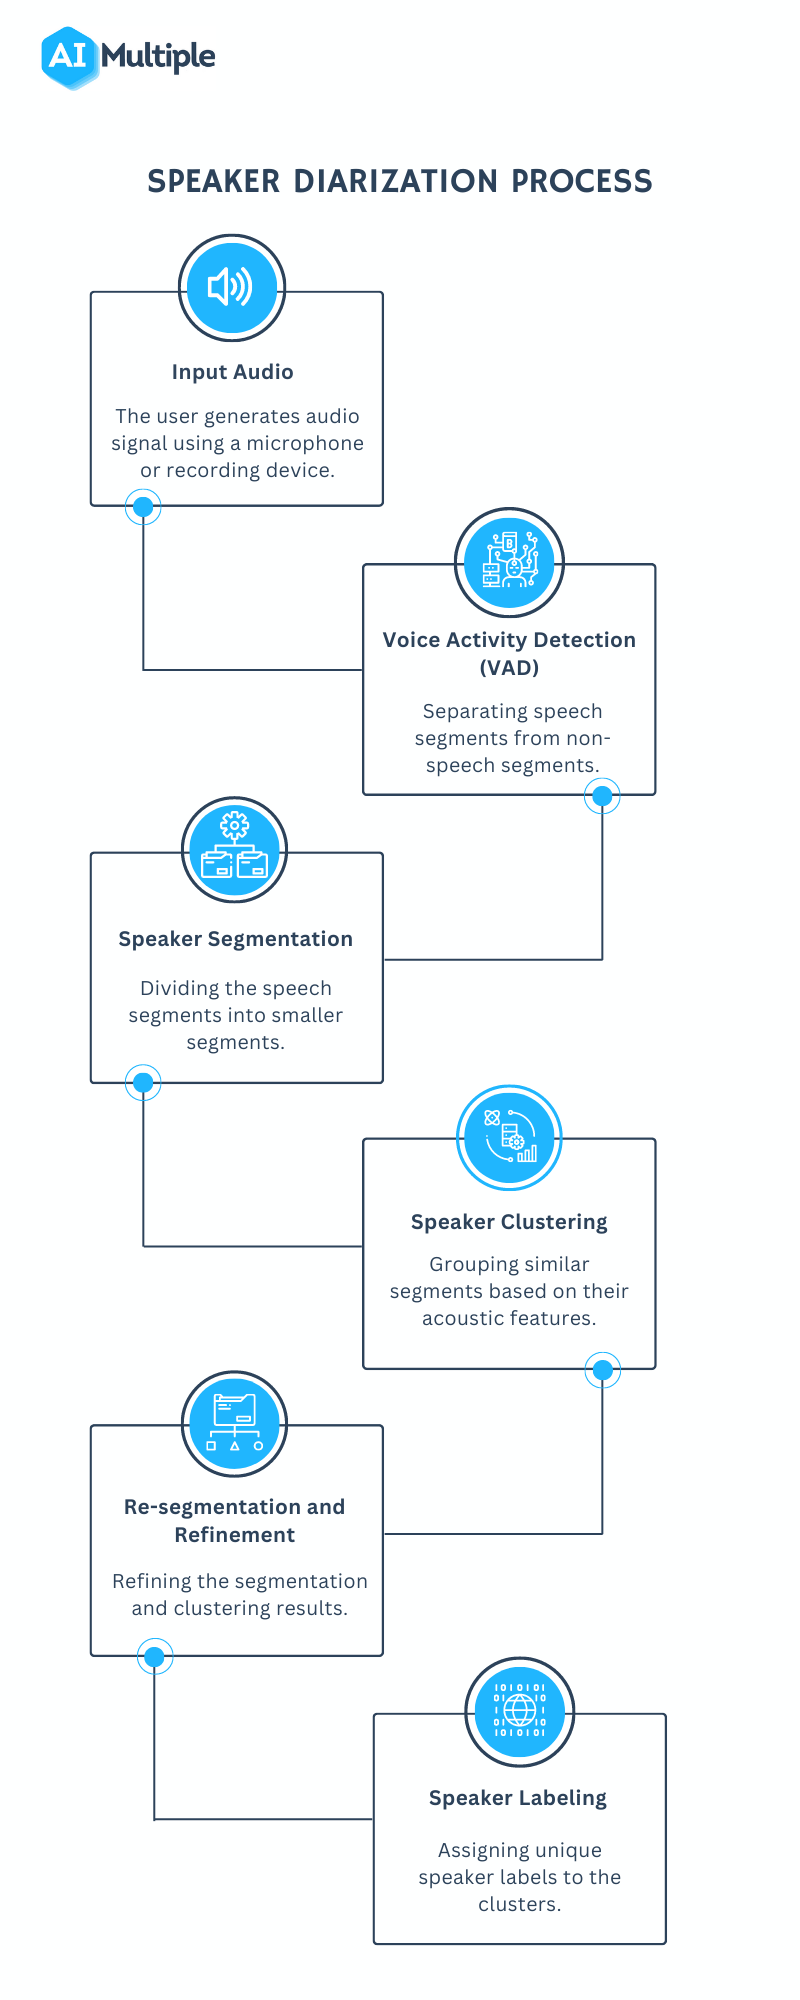 The image describes the process of speaker diarization, where multiple speakers in an audio recording are segmented and identified. 